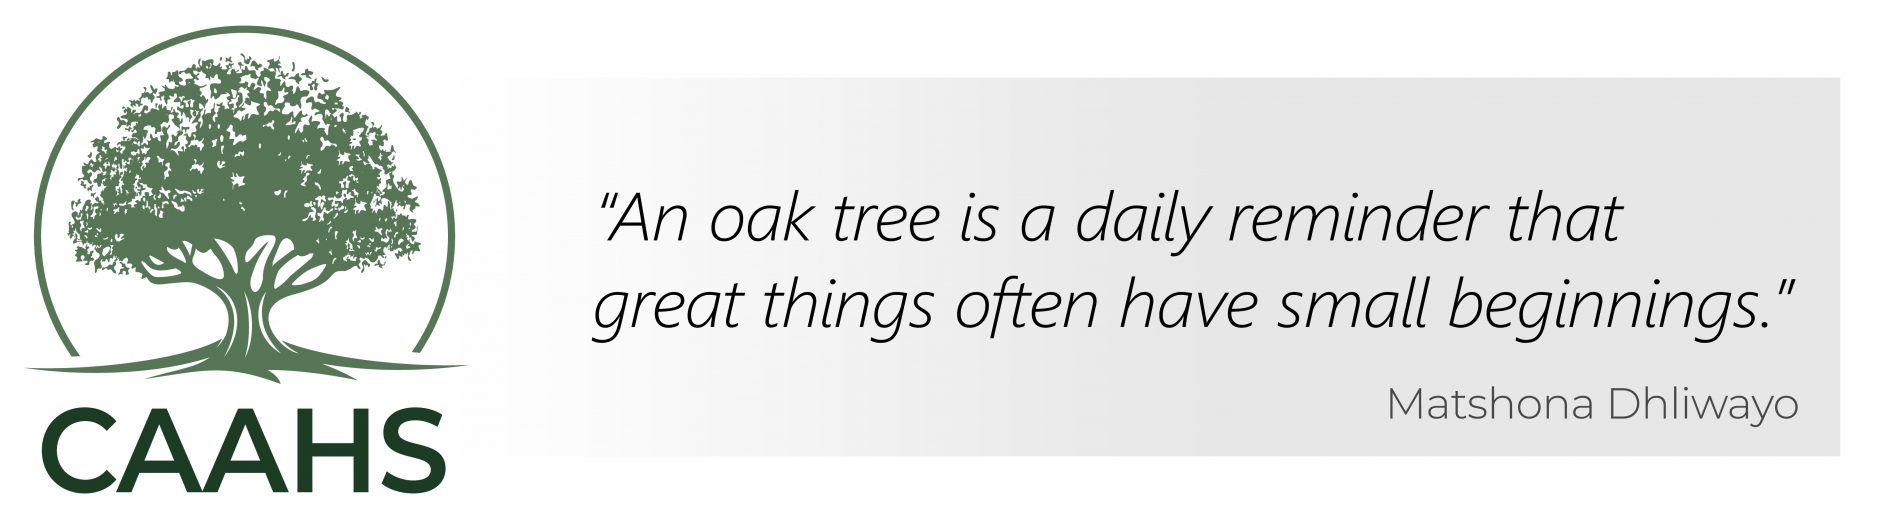 Oak tree CAAHS logo with quote "An oak tree is a daily reminder that great things often have small beginnings" Matshona Dhliwayo